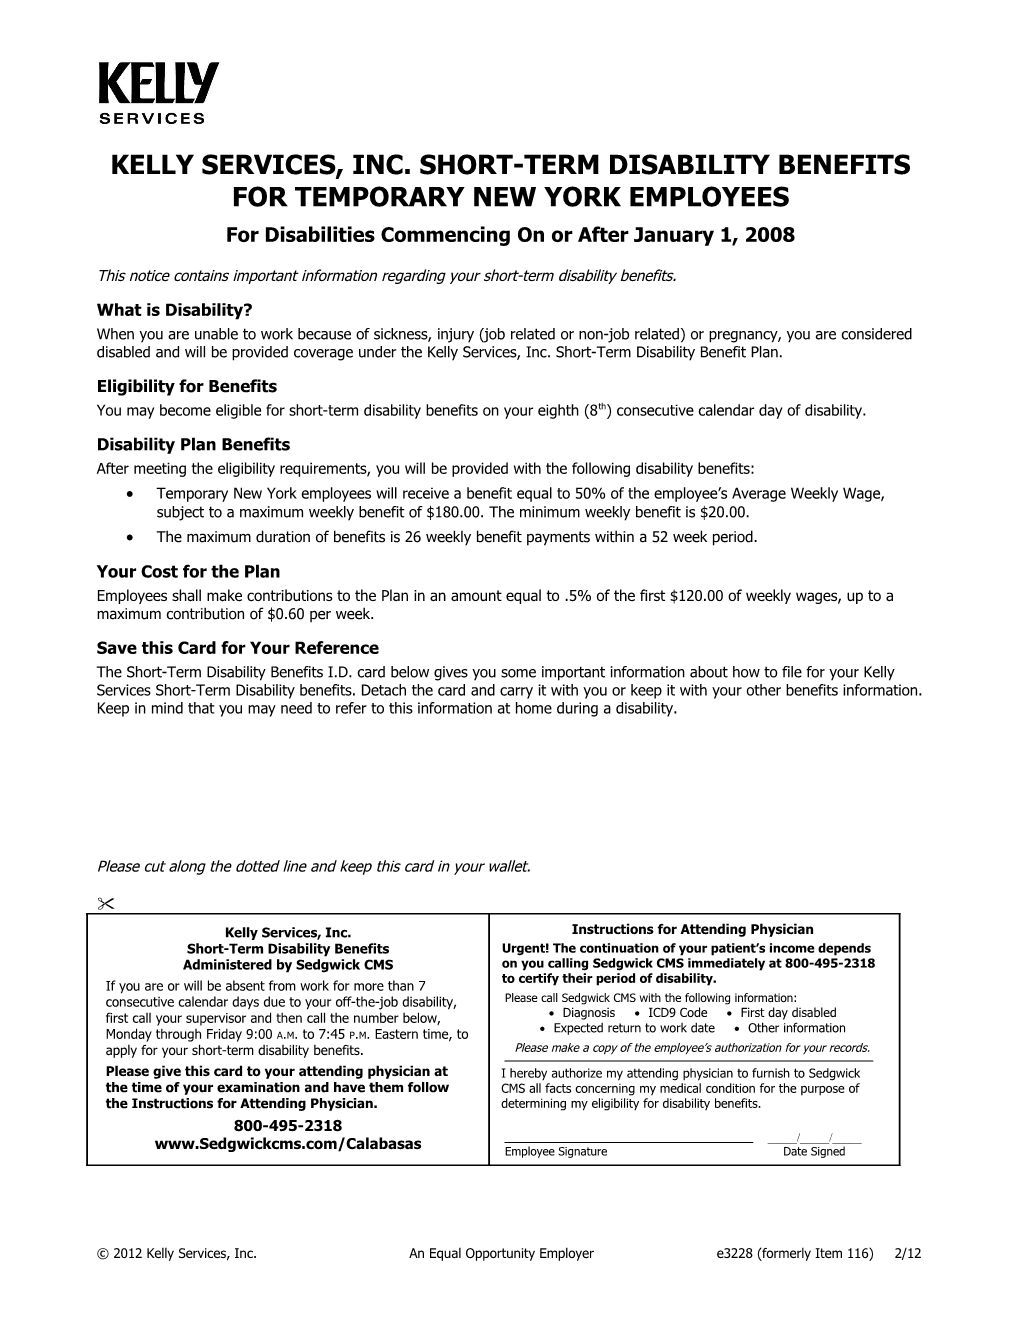 Short-Term Disability Benefits for Temporary Employees in New York (E3228)